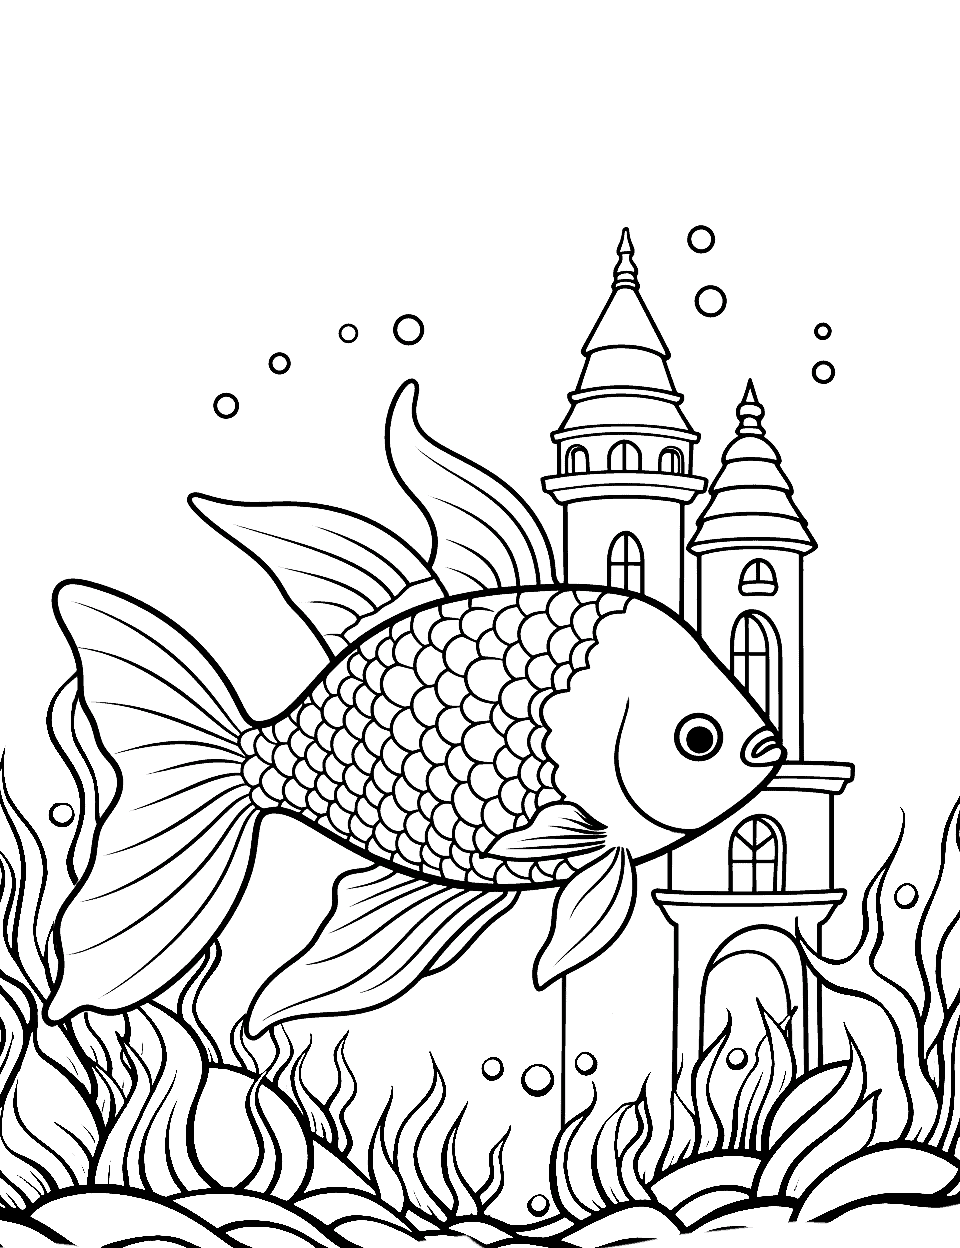 Fairytale Fish Kingdom Coloring Page - Fish living in a fairytale world with castles.